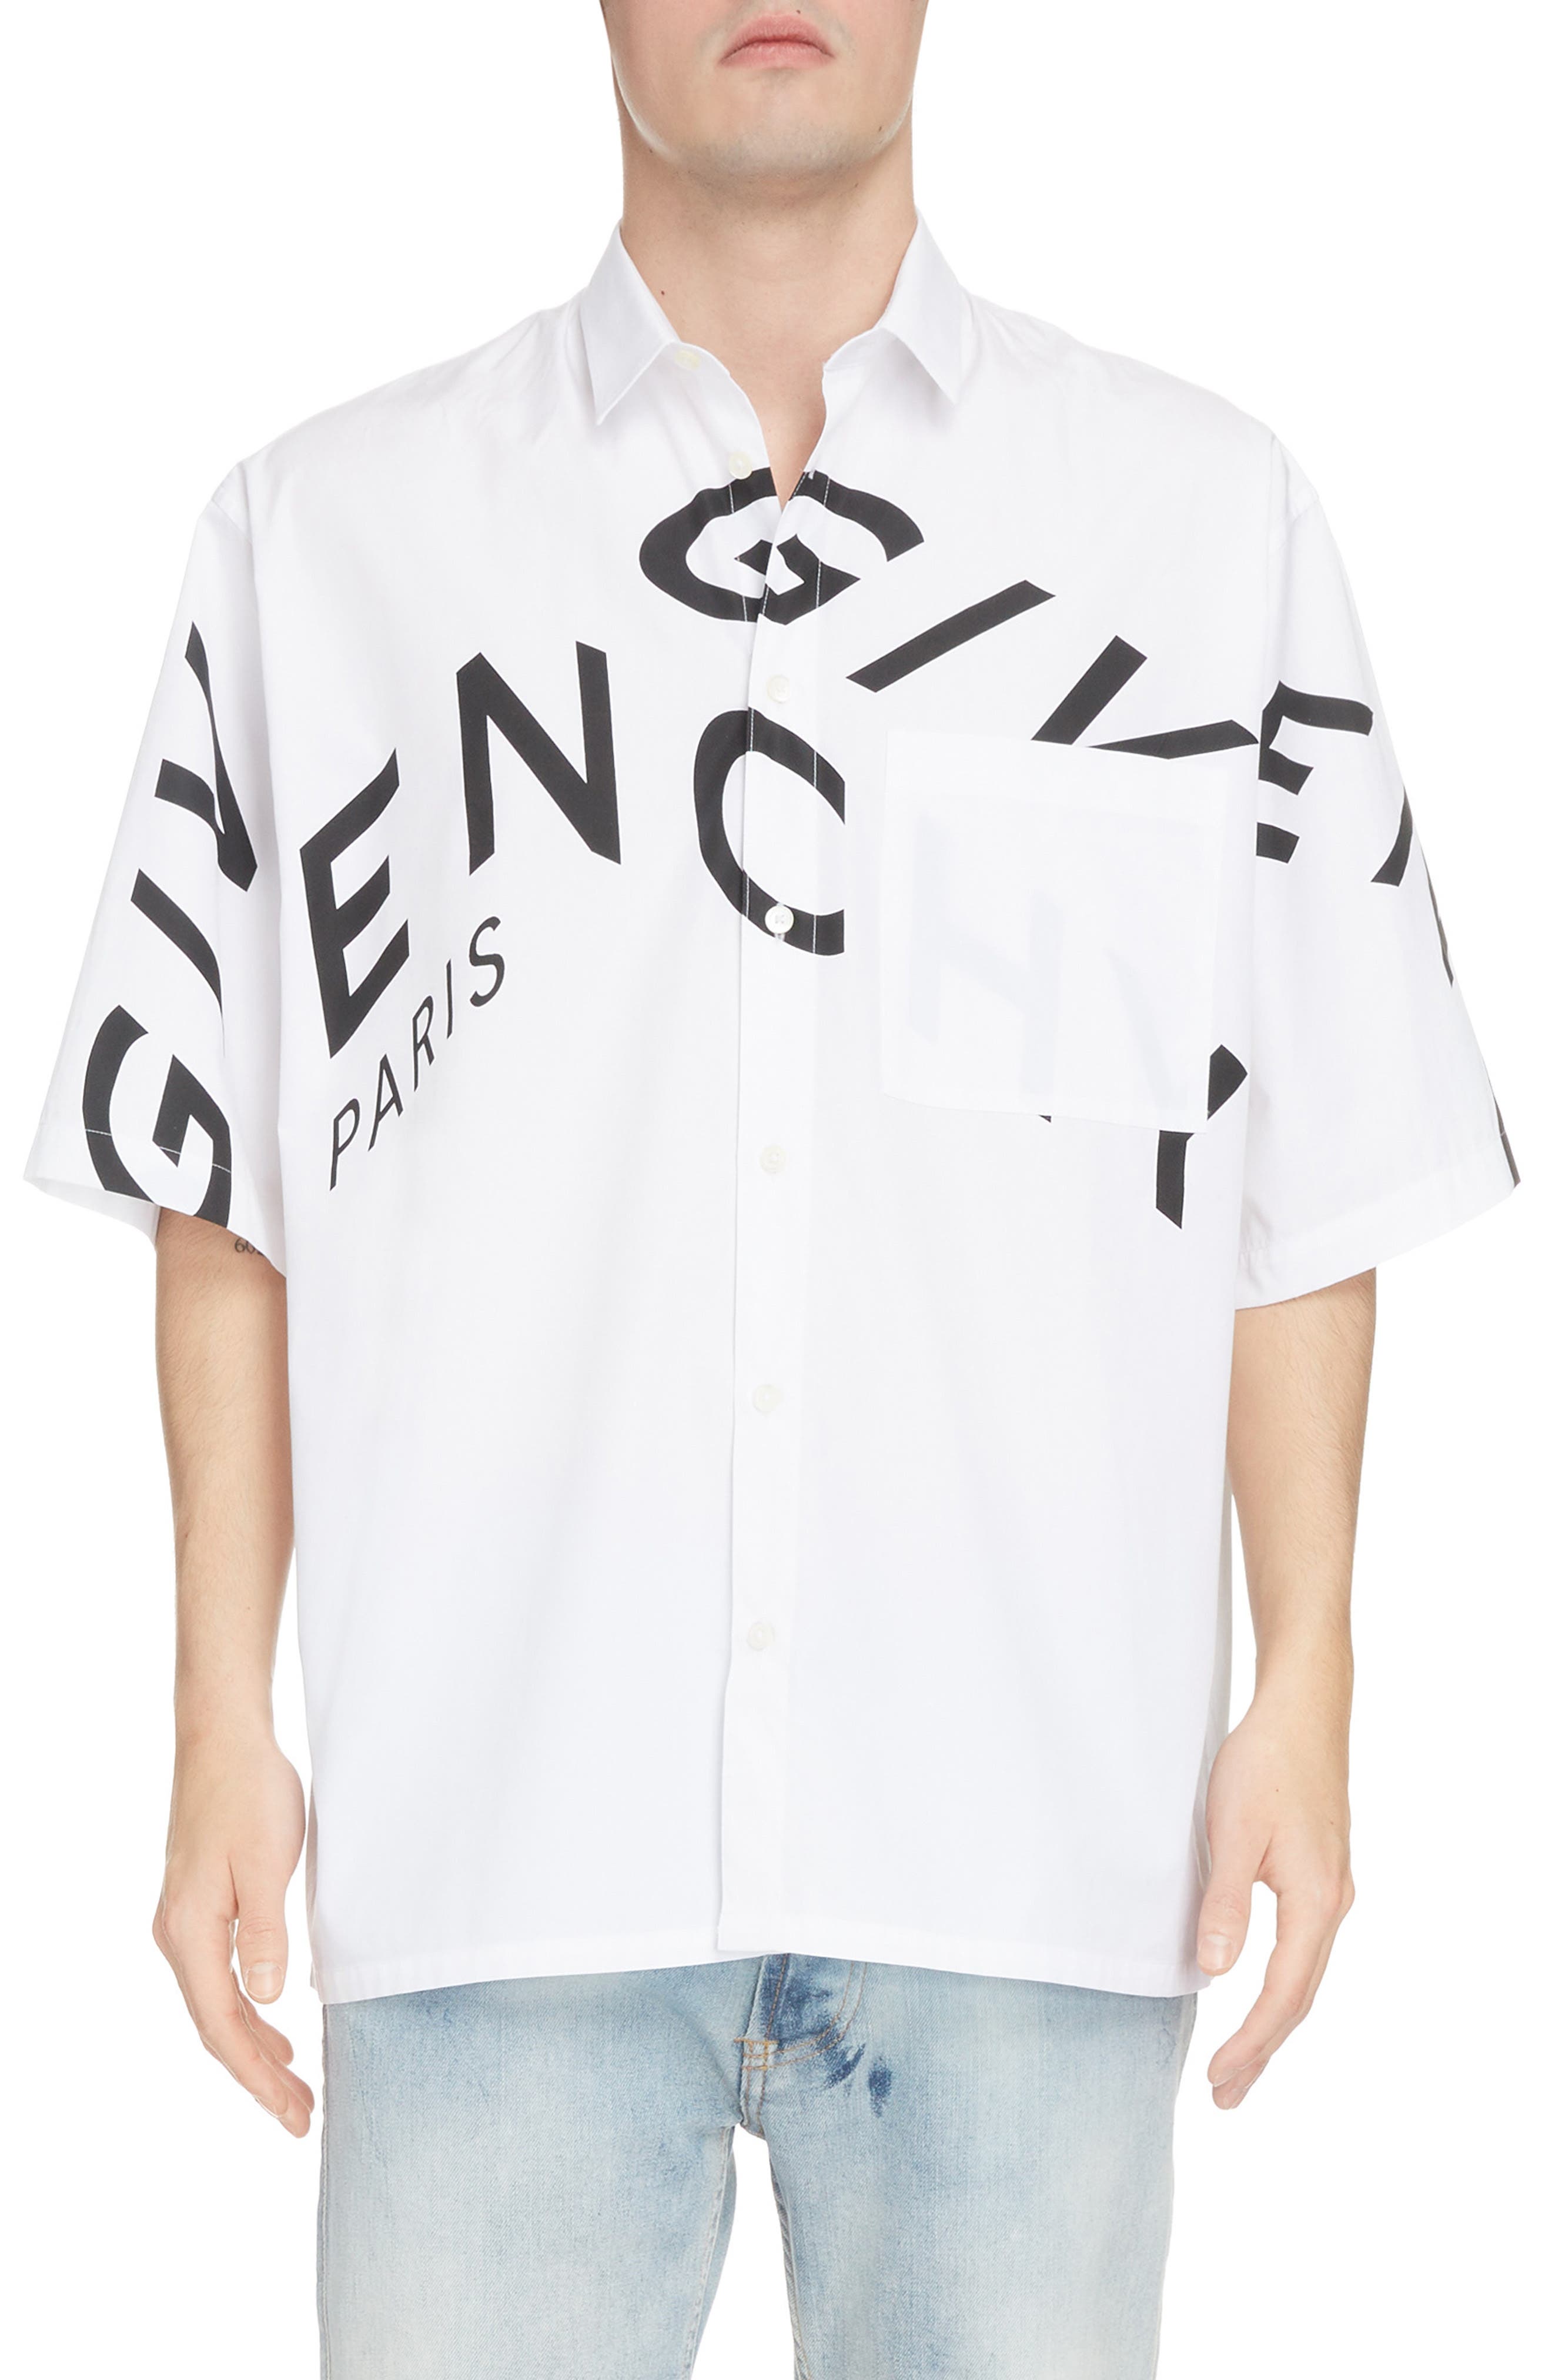 givenchy button up